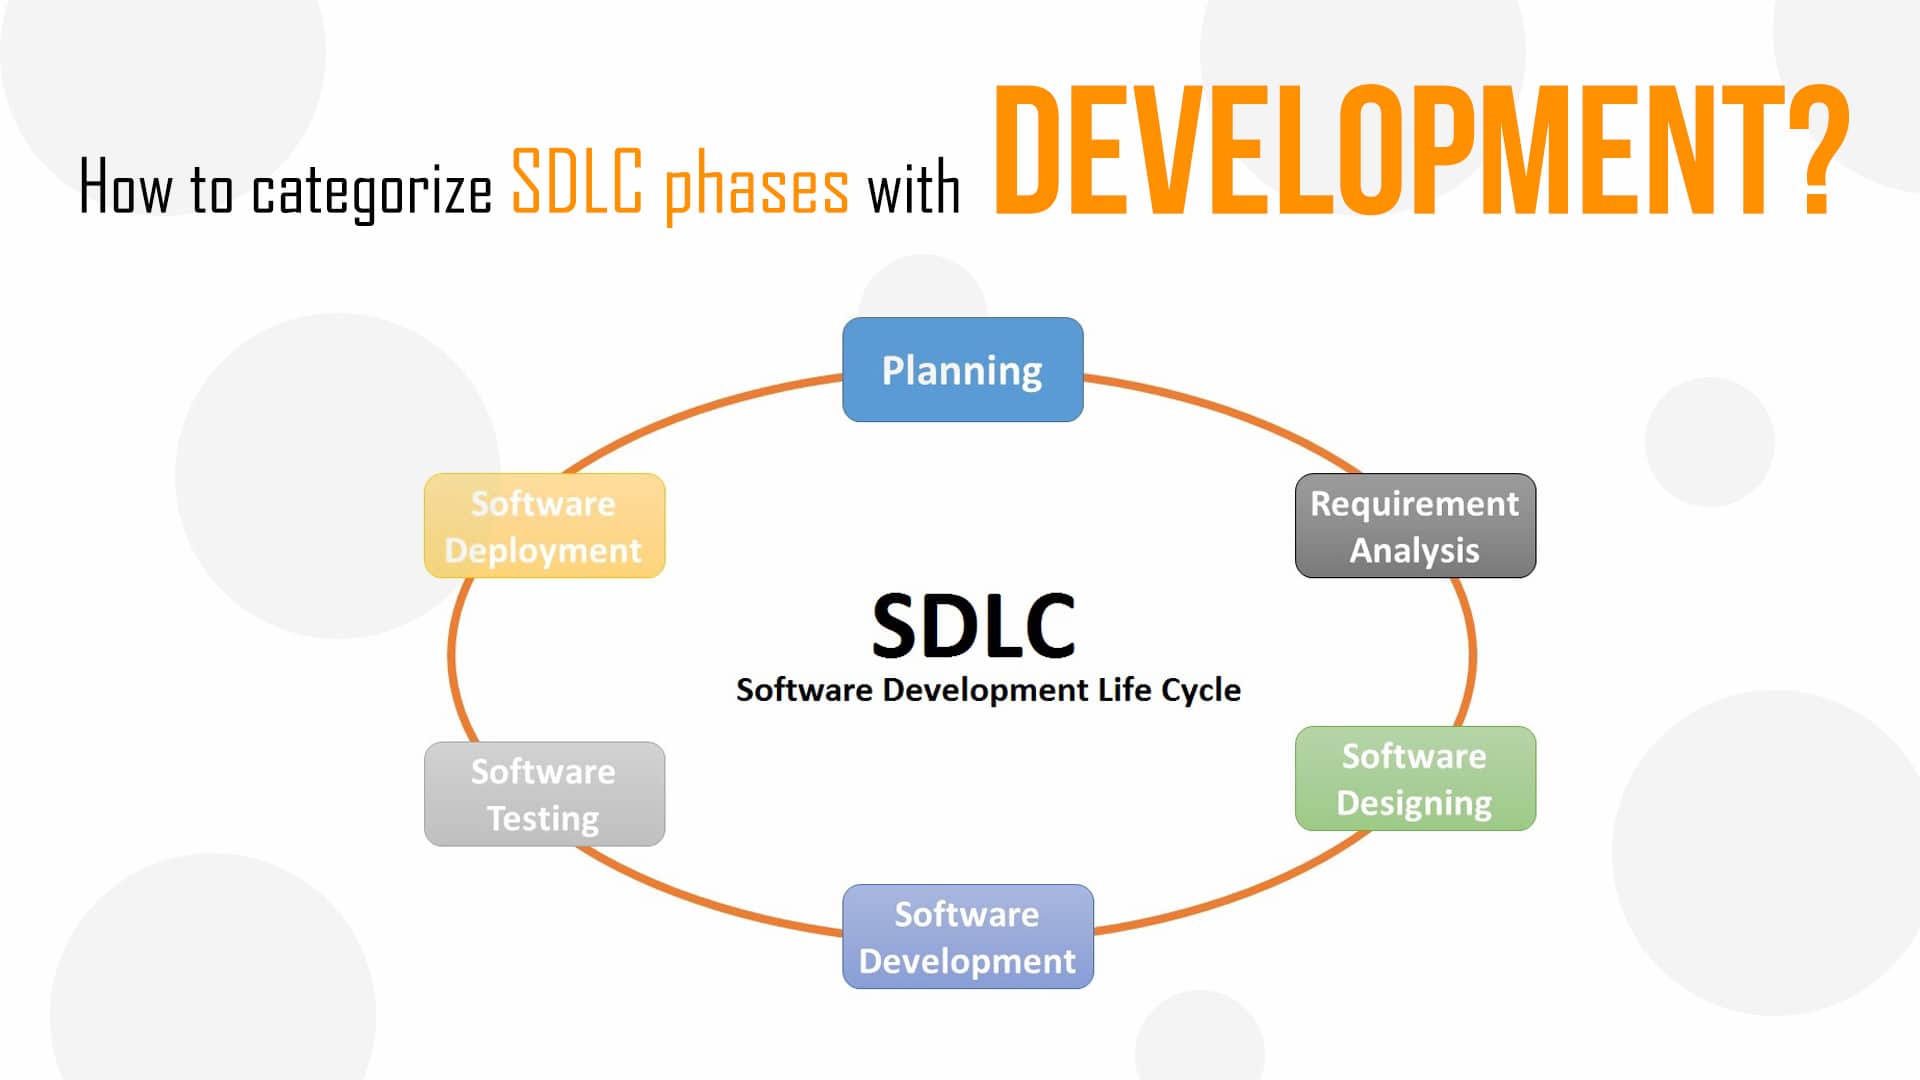 saw Pointer Cane software development life cycle phases Scold ...